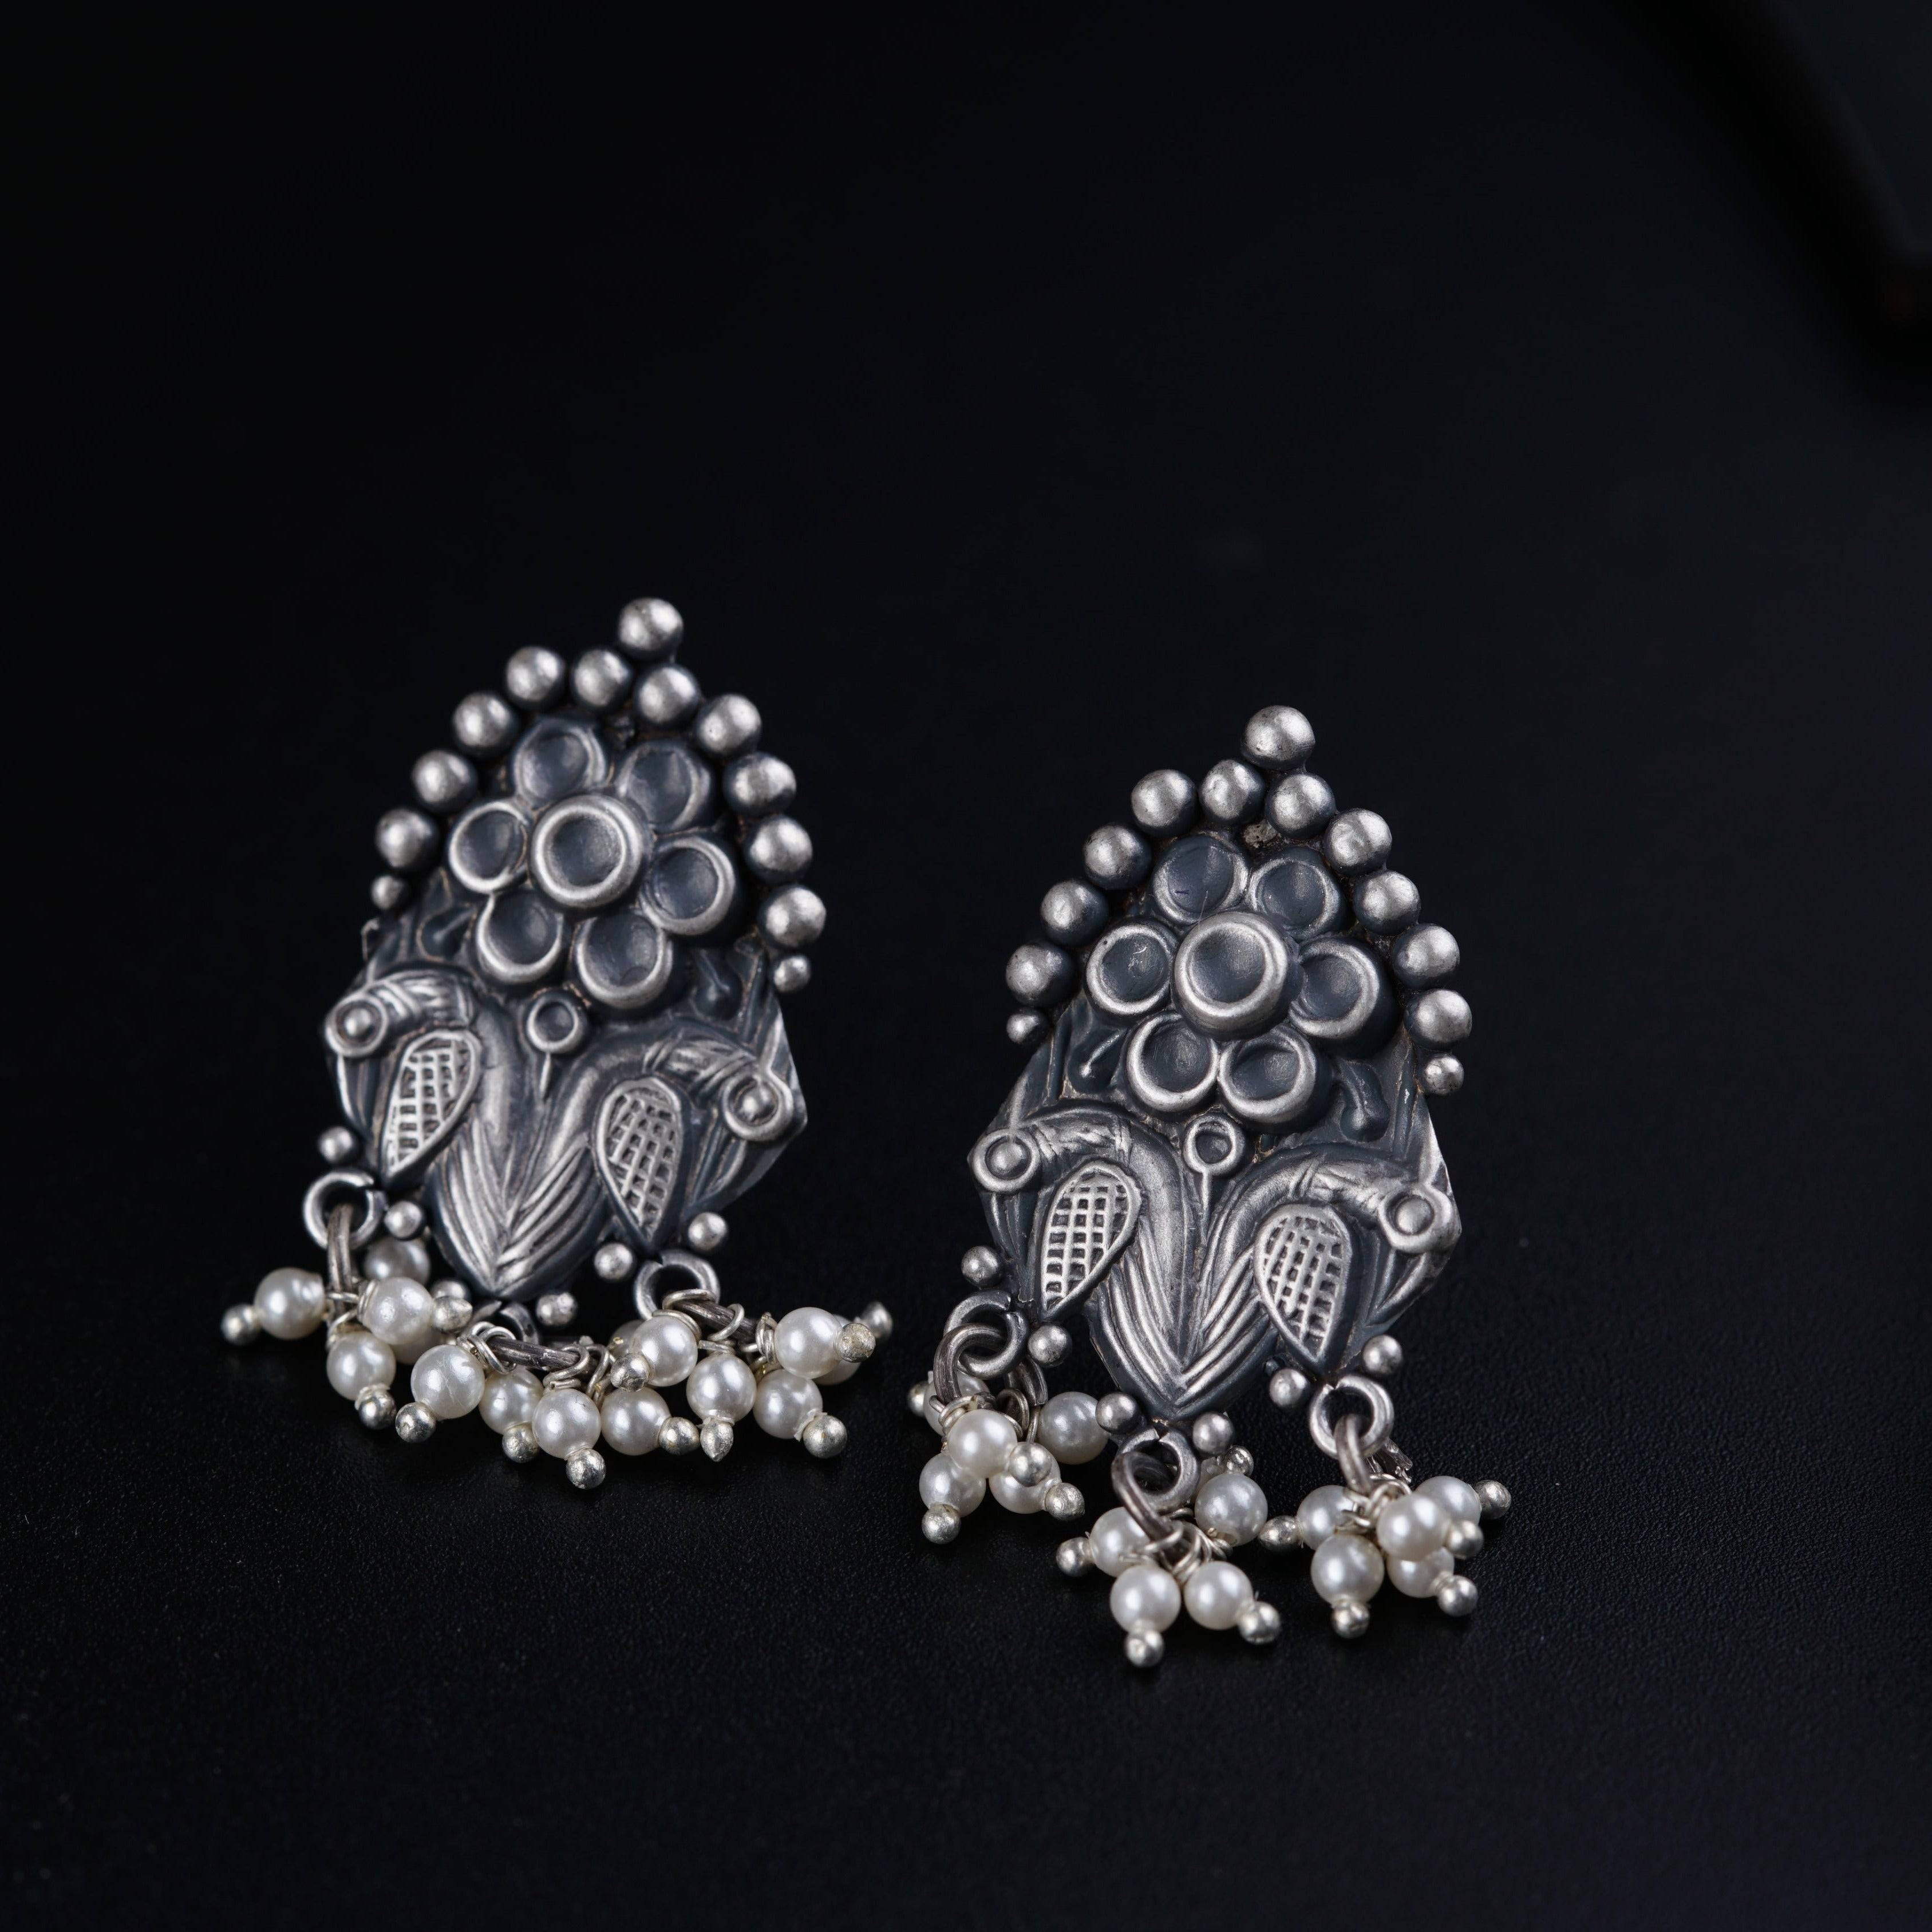 a pair of silver earrings with pearls on a black background